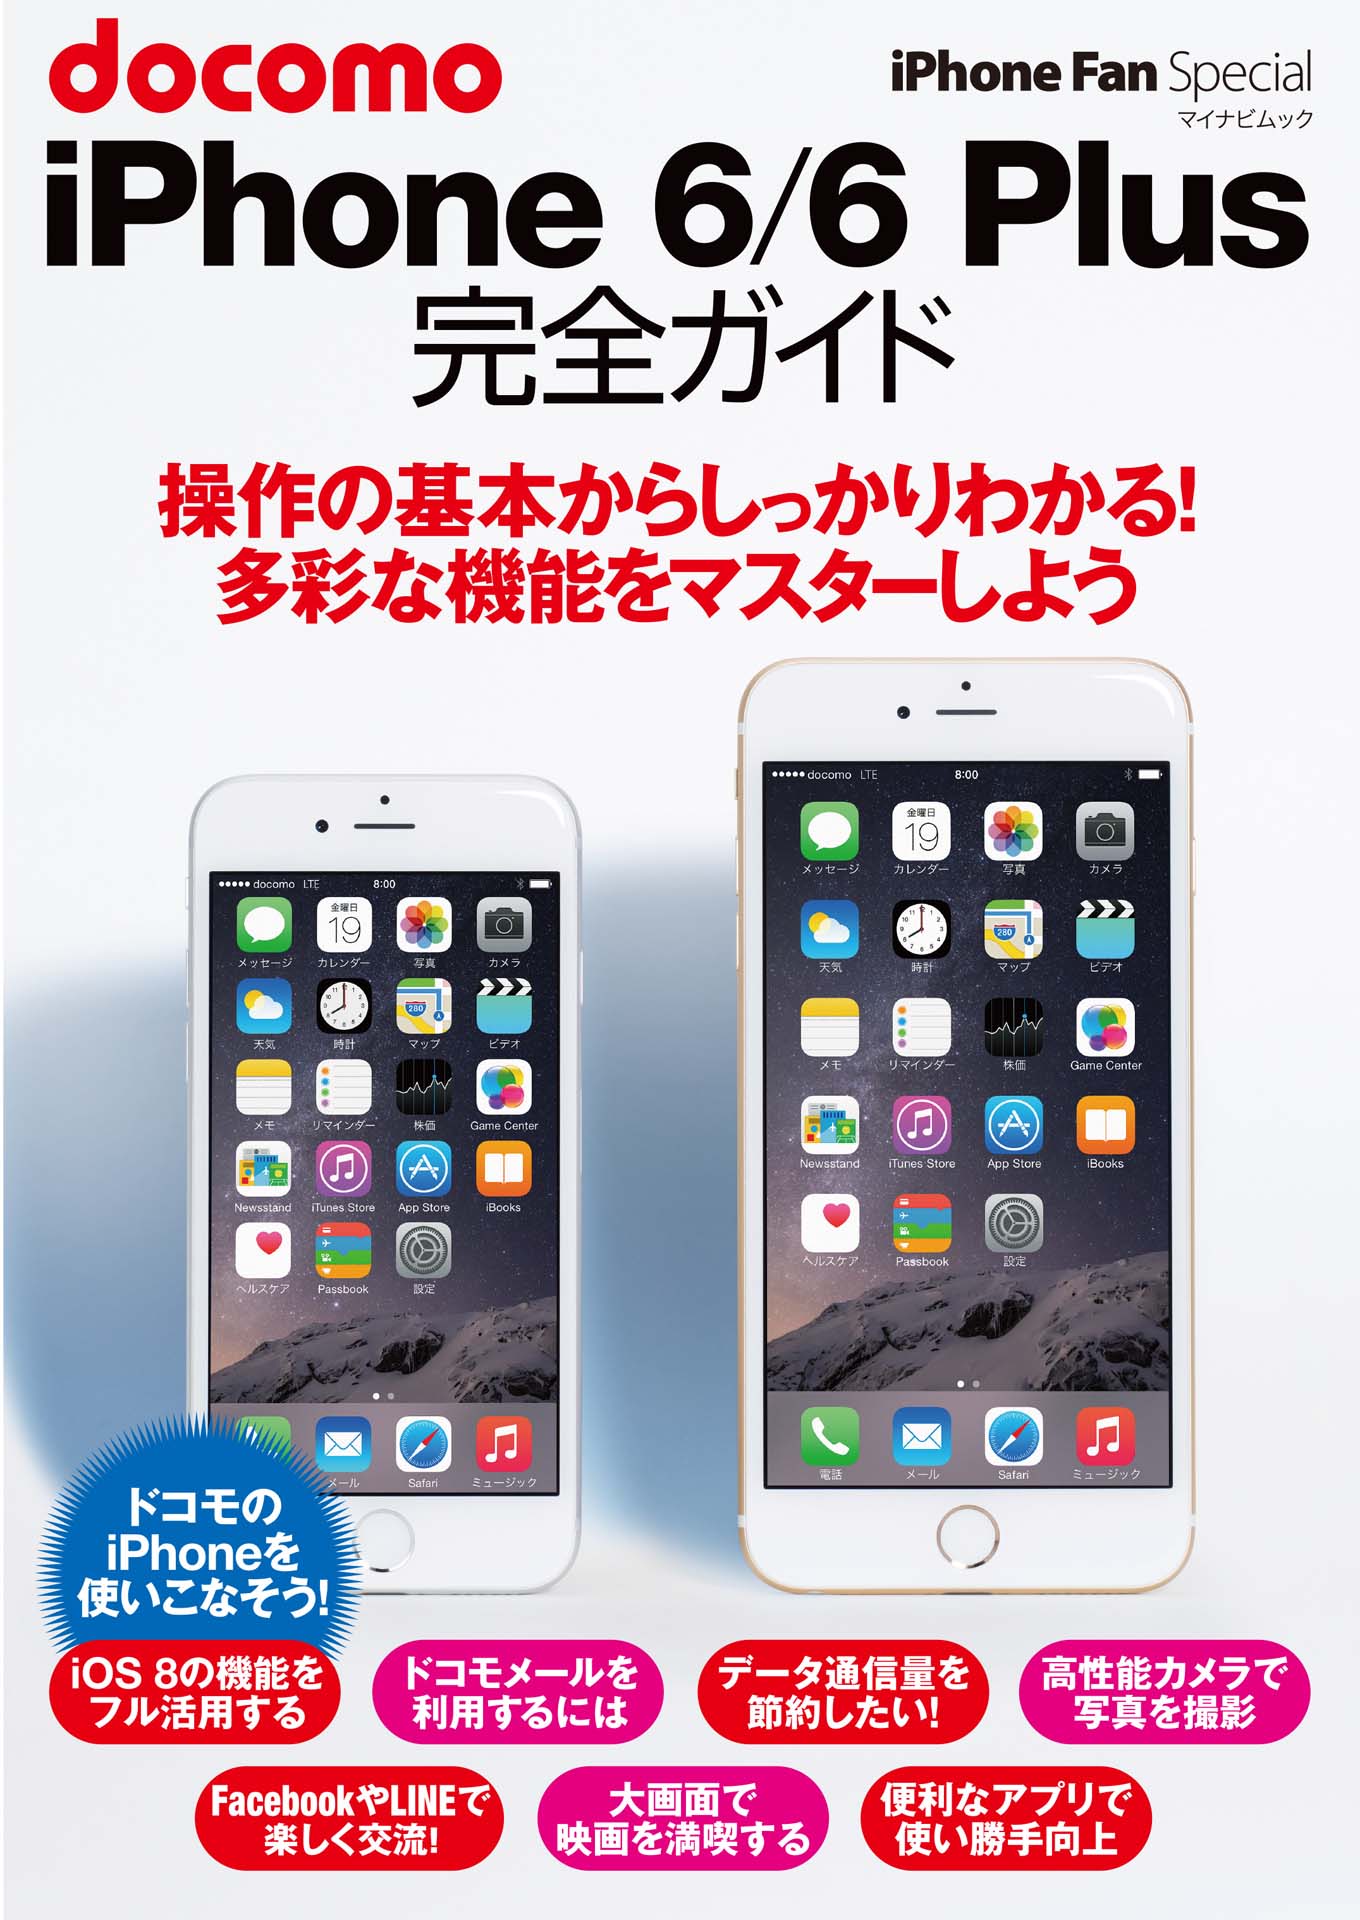 iPhone Fan Special docomo iPhone 6/6 Plus 完全ガイド | ブックライブ